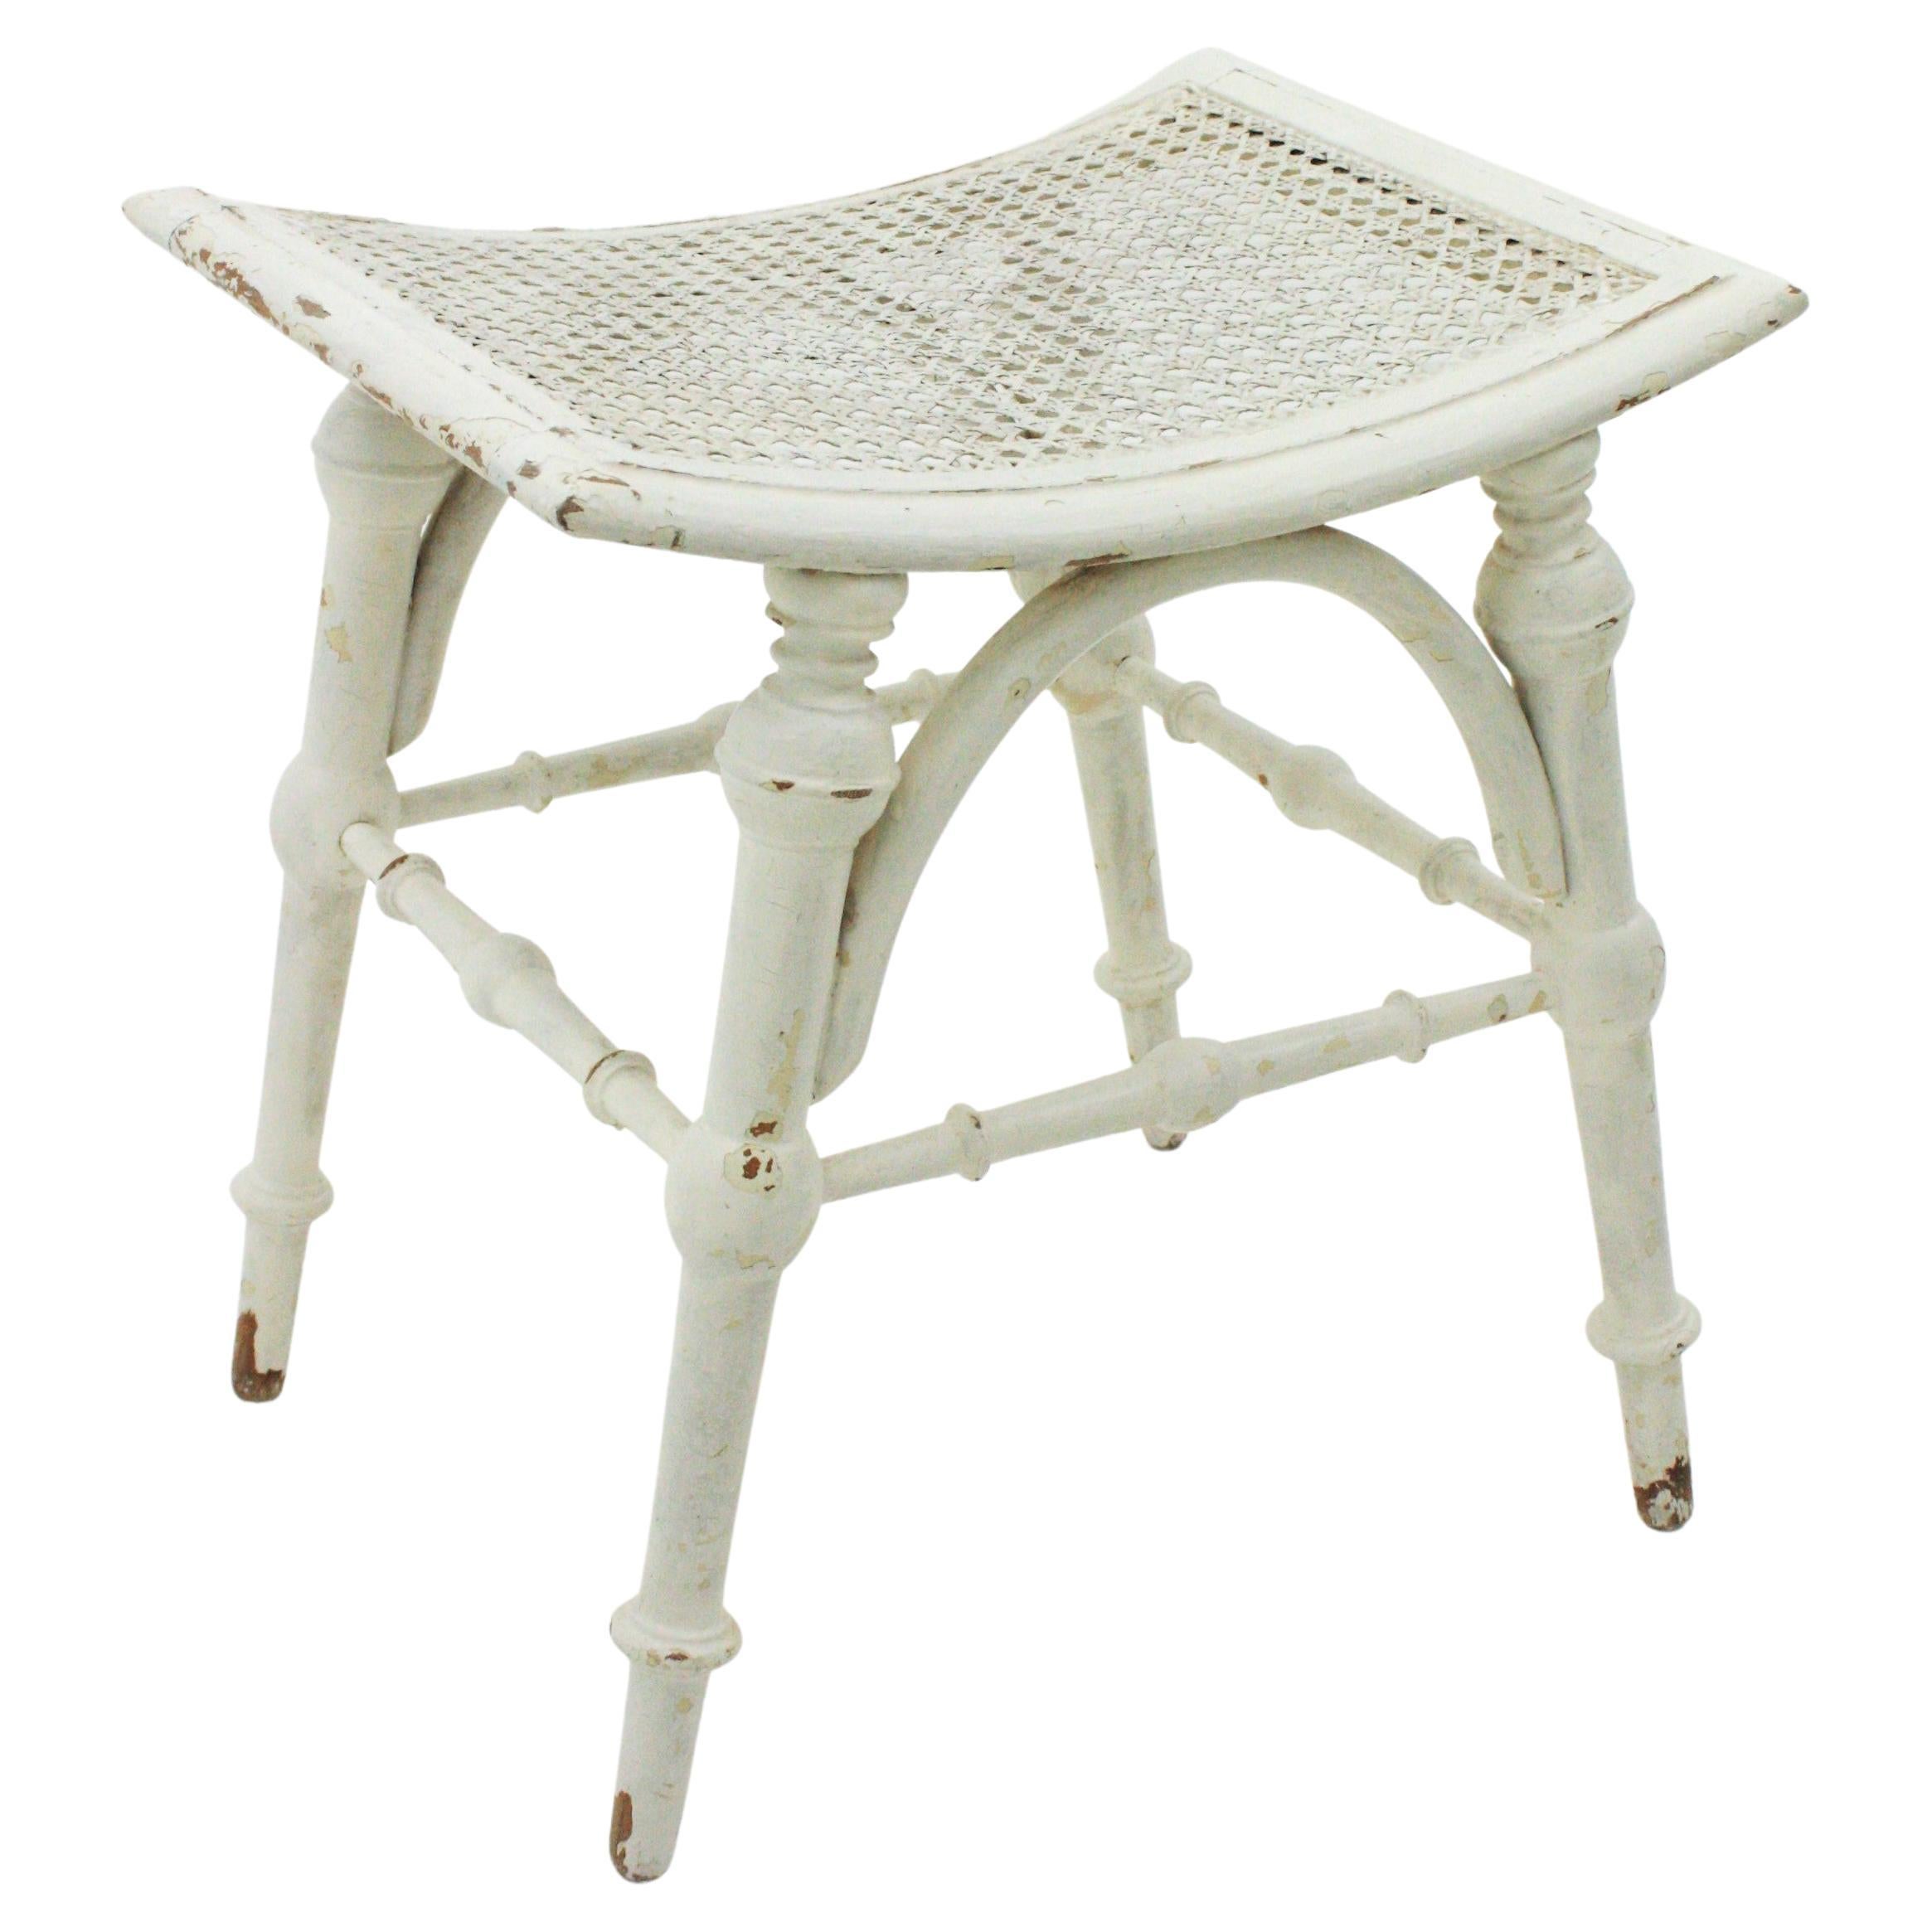 Chippendale Stool in White Patina, Cane and Wood